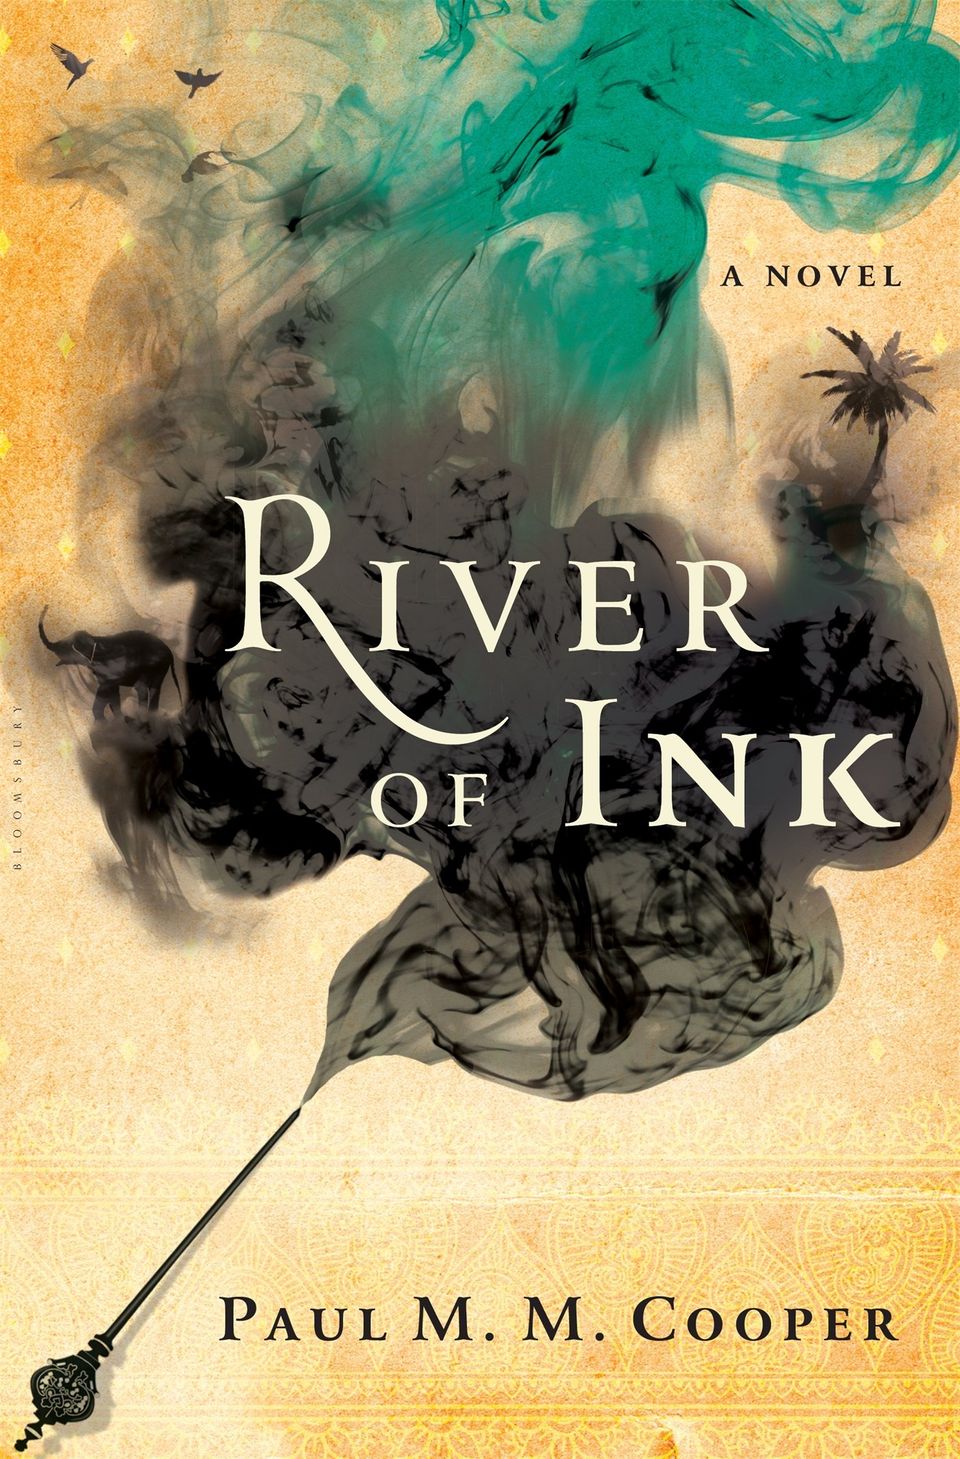 Through a "River of Ink"